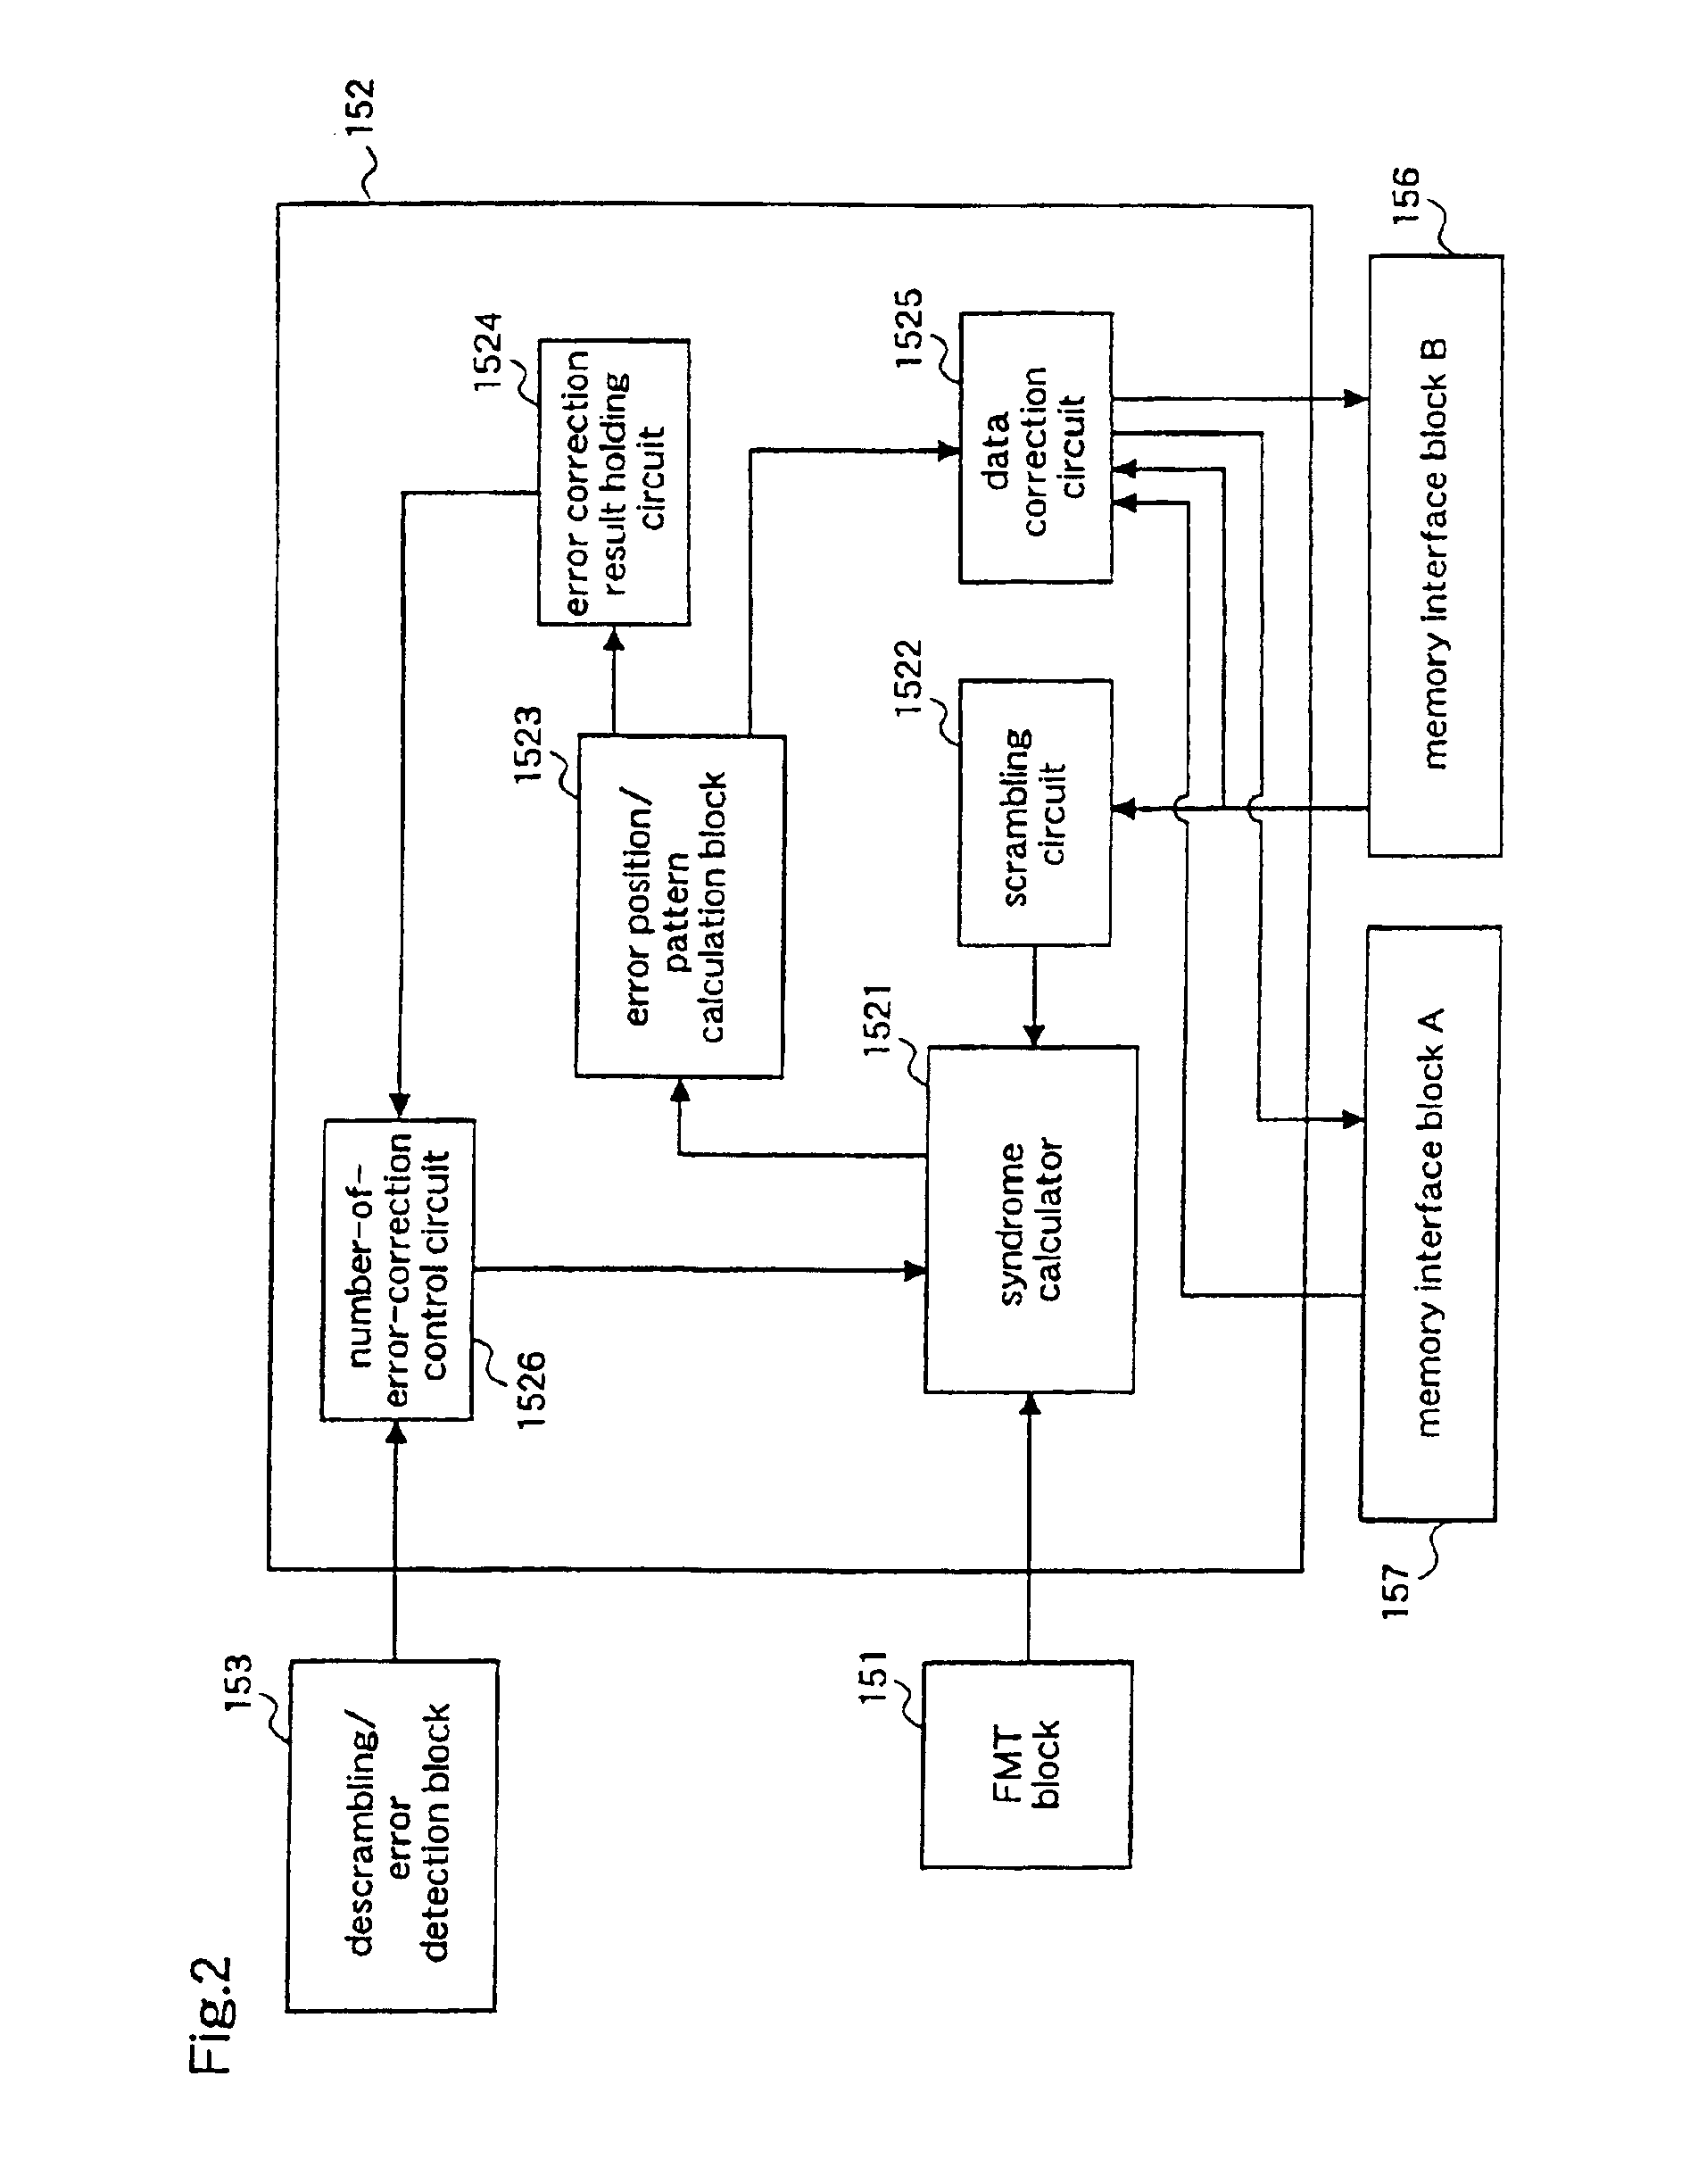 Signal processor for correcting and detecting errors